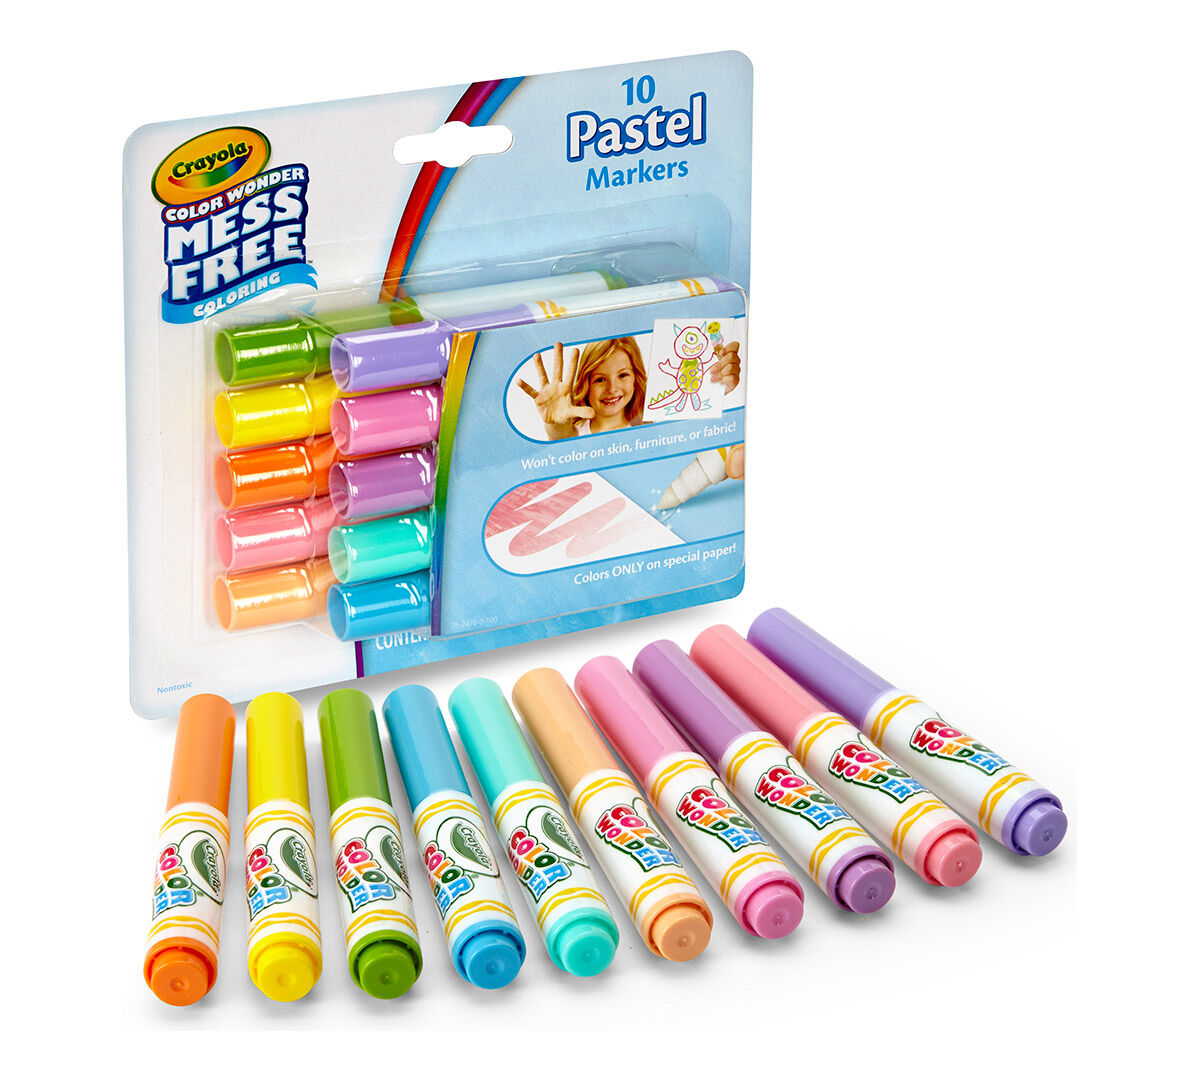 Crayola Color Wonder 10 Mini Markers Bright Colors 75-2279 New in package 